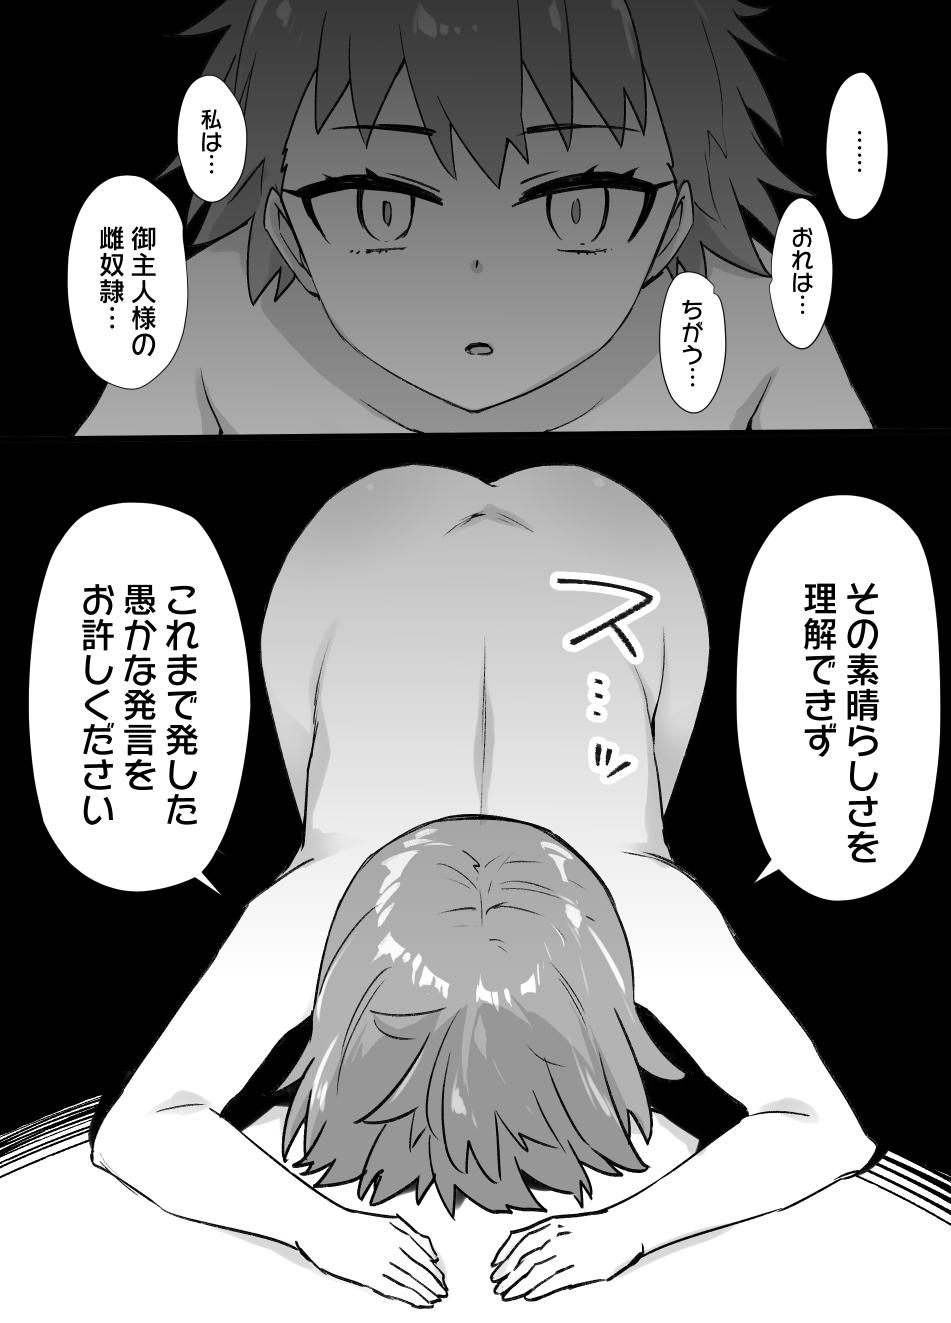 A manga about Shirou Emiya who went to save Rin Tohsaka from captivity and is transformed into a female slave through physical feminization and brainwashing[Fate/ stay night) 6